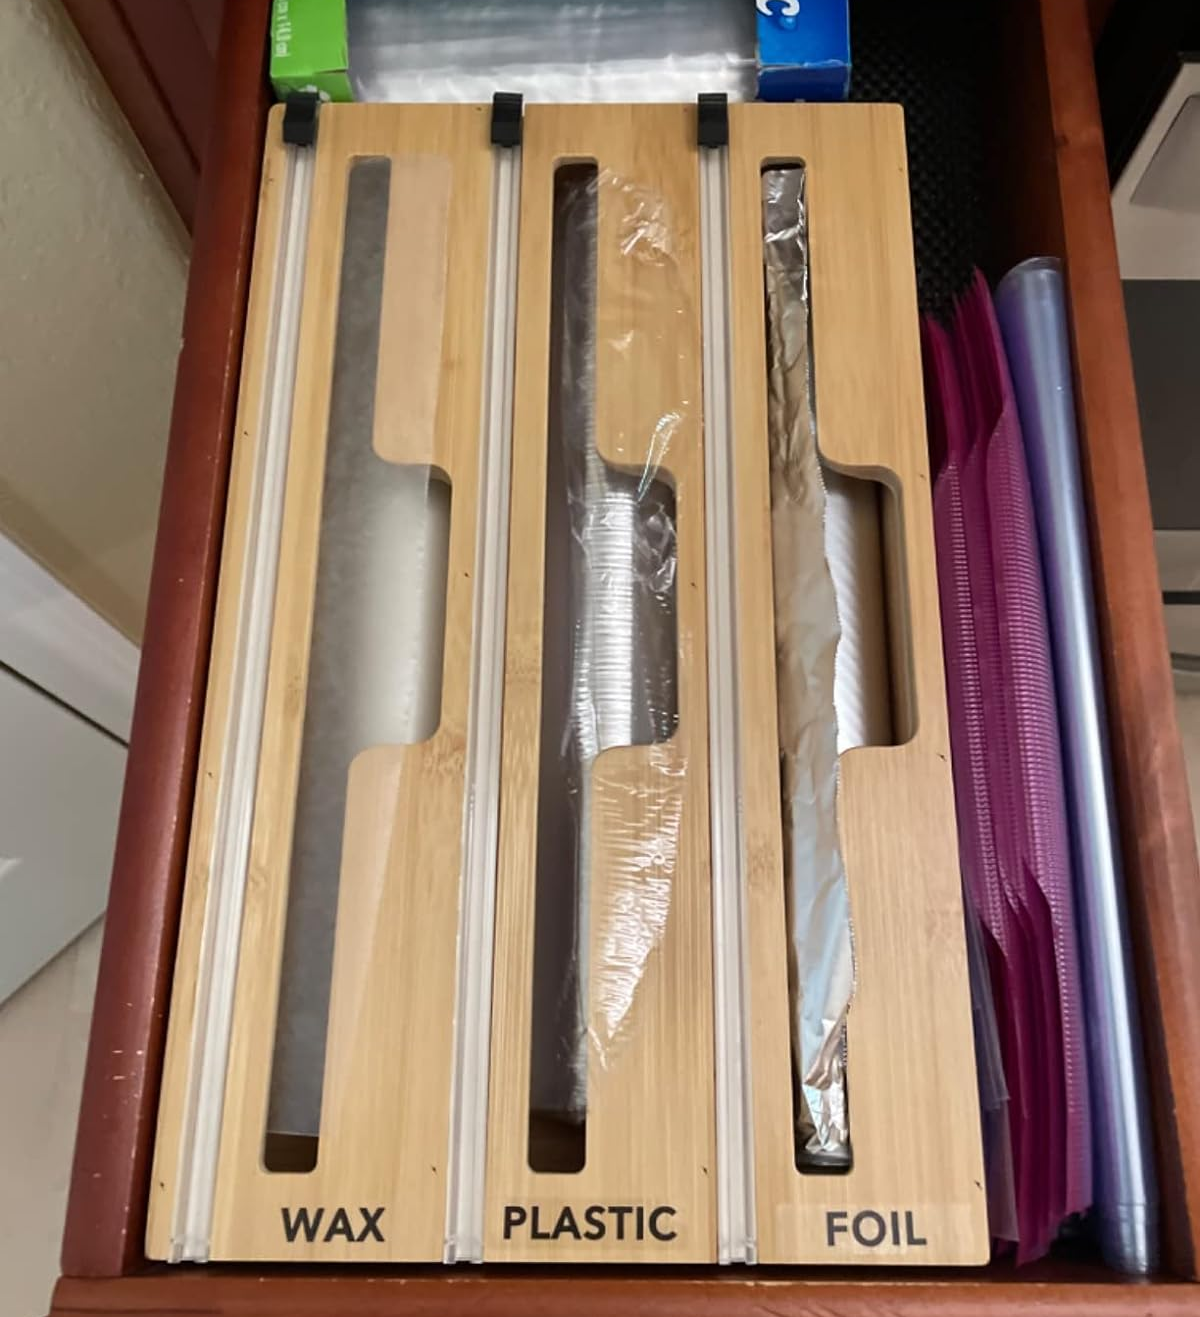 Why you shouldn't keep plastic wrap in a drawer